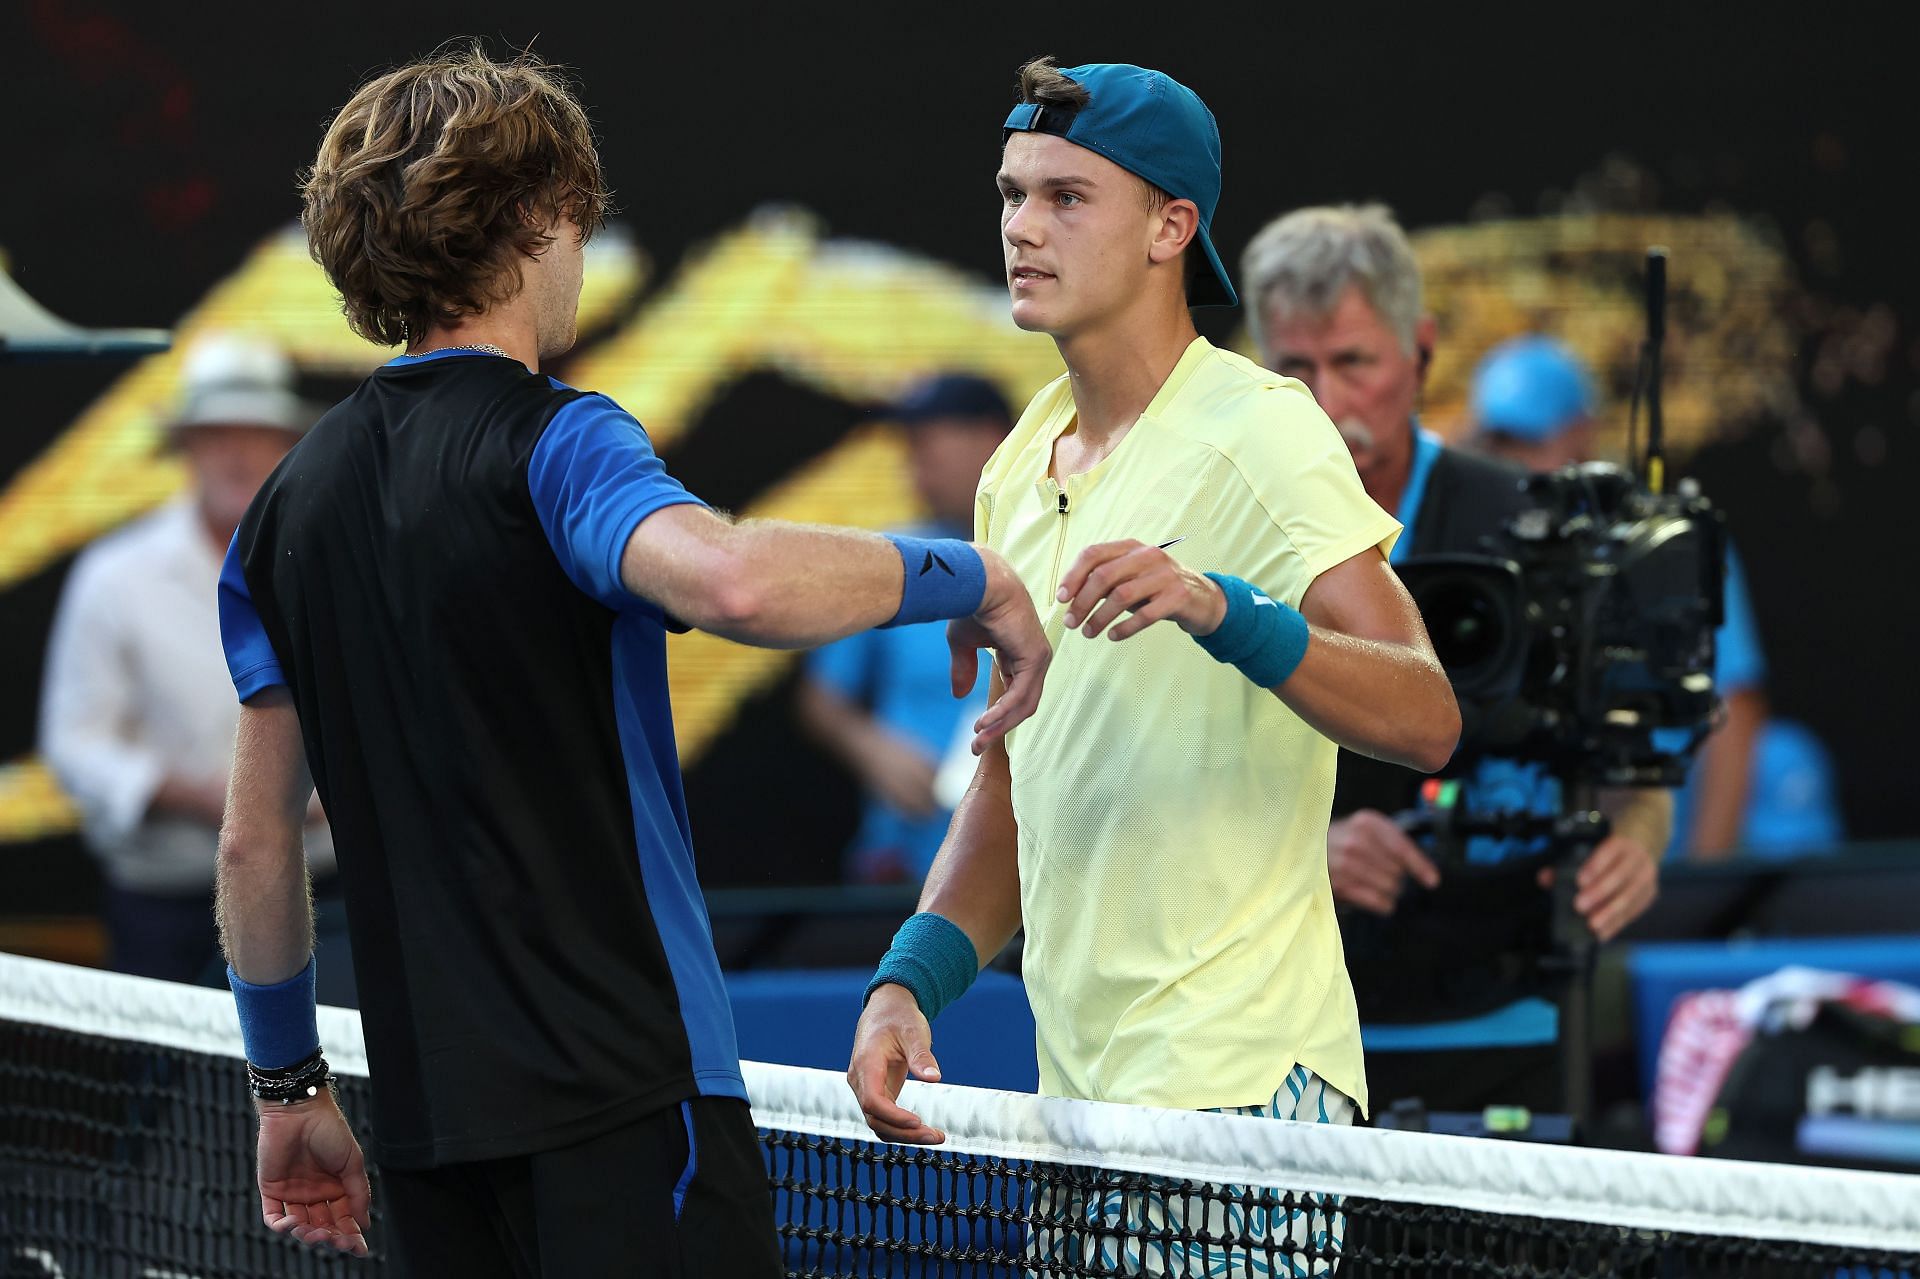 Monte-Carlo Masters 2023 Final, Andrey Rublev vs Holger Rune Where to watch, TV schedule, live streaming details, and more